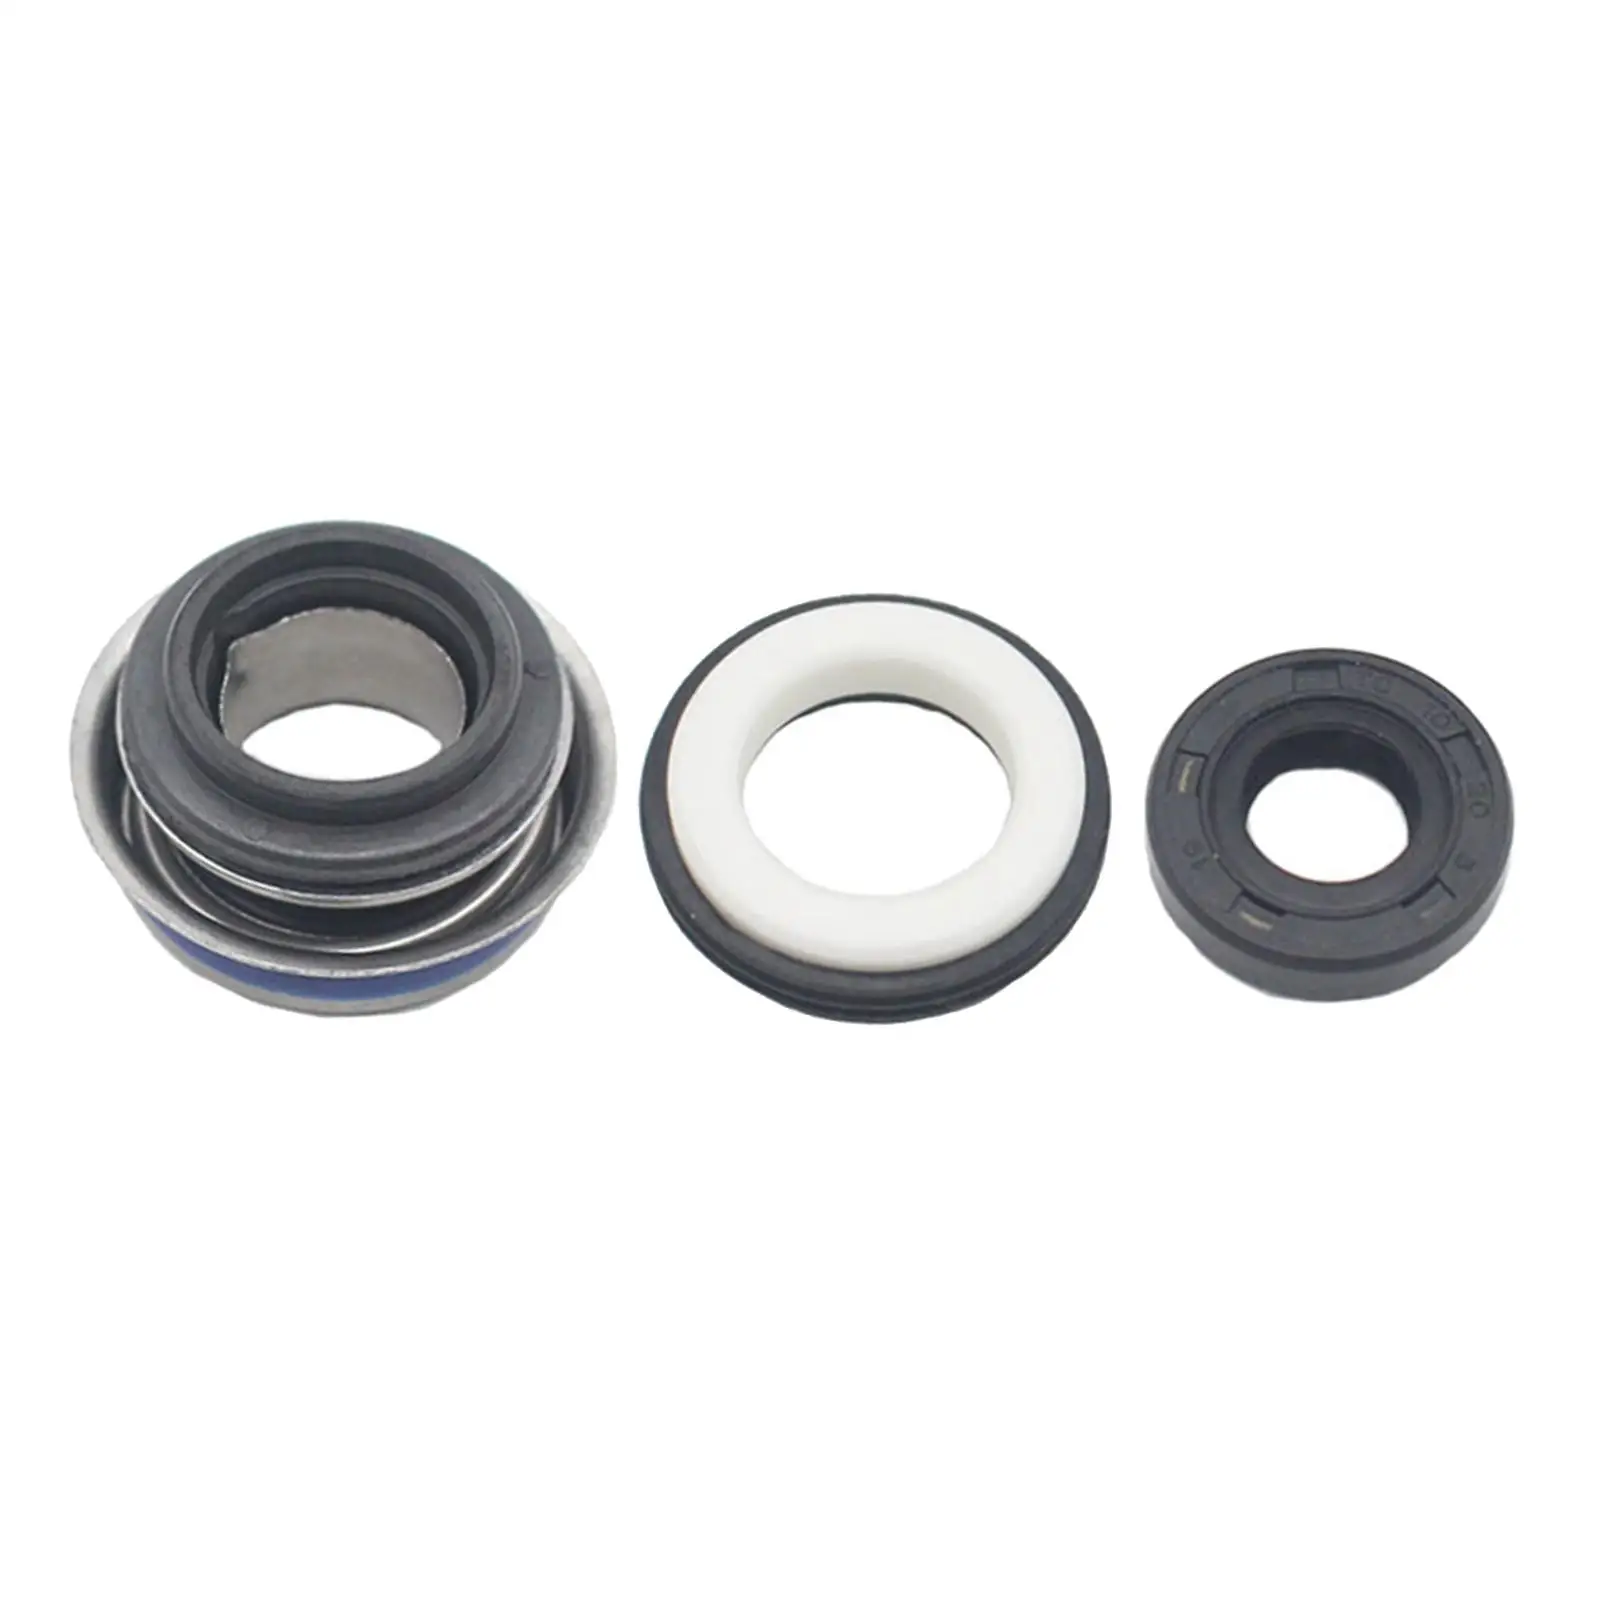 /14/15mm Water Pump Seal  Kit Accessory for 188 Quad Engine Parts Fittings 0010-0810010-081000 0110-08000 New